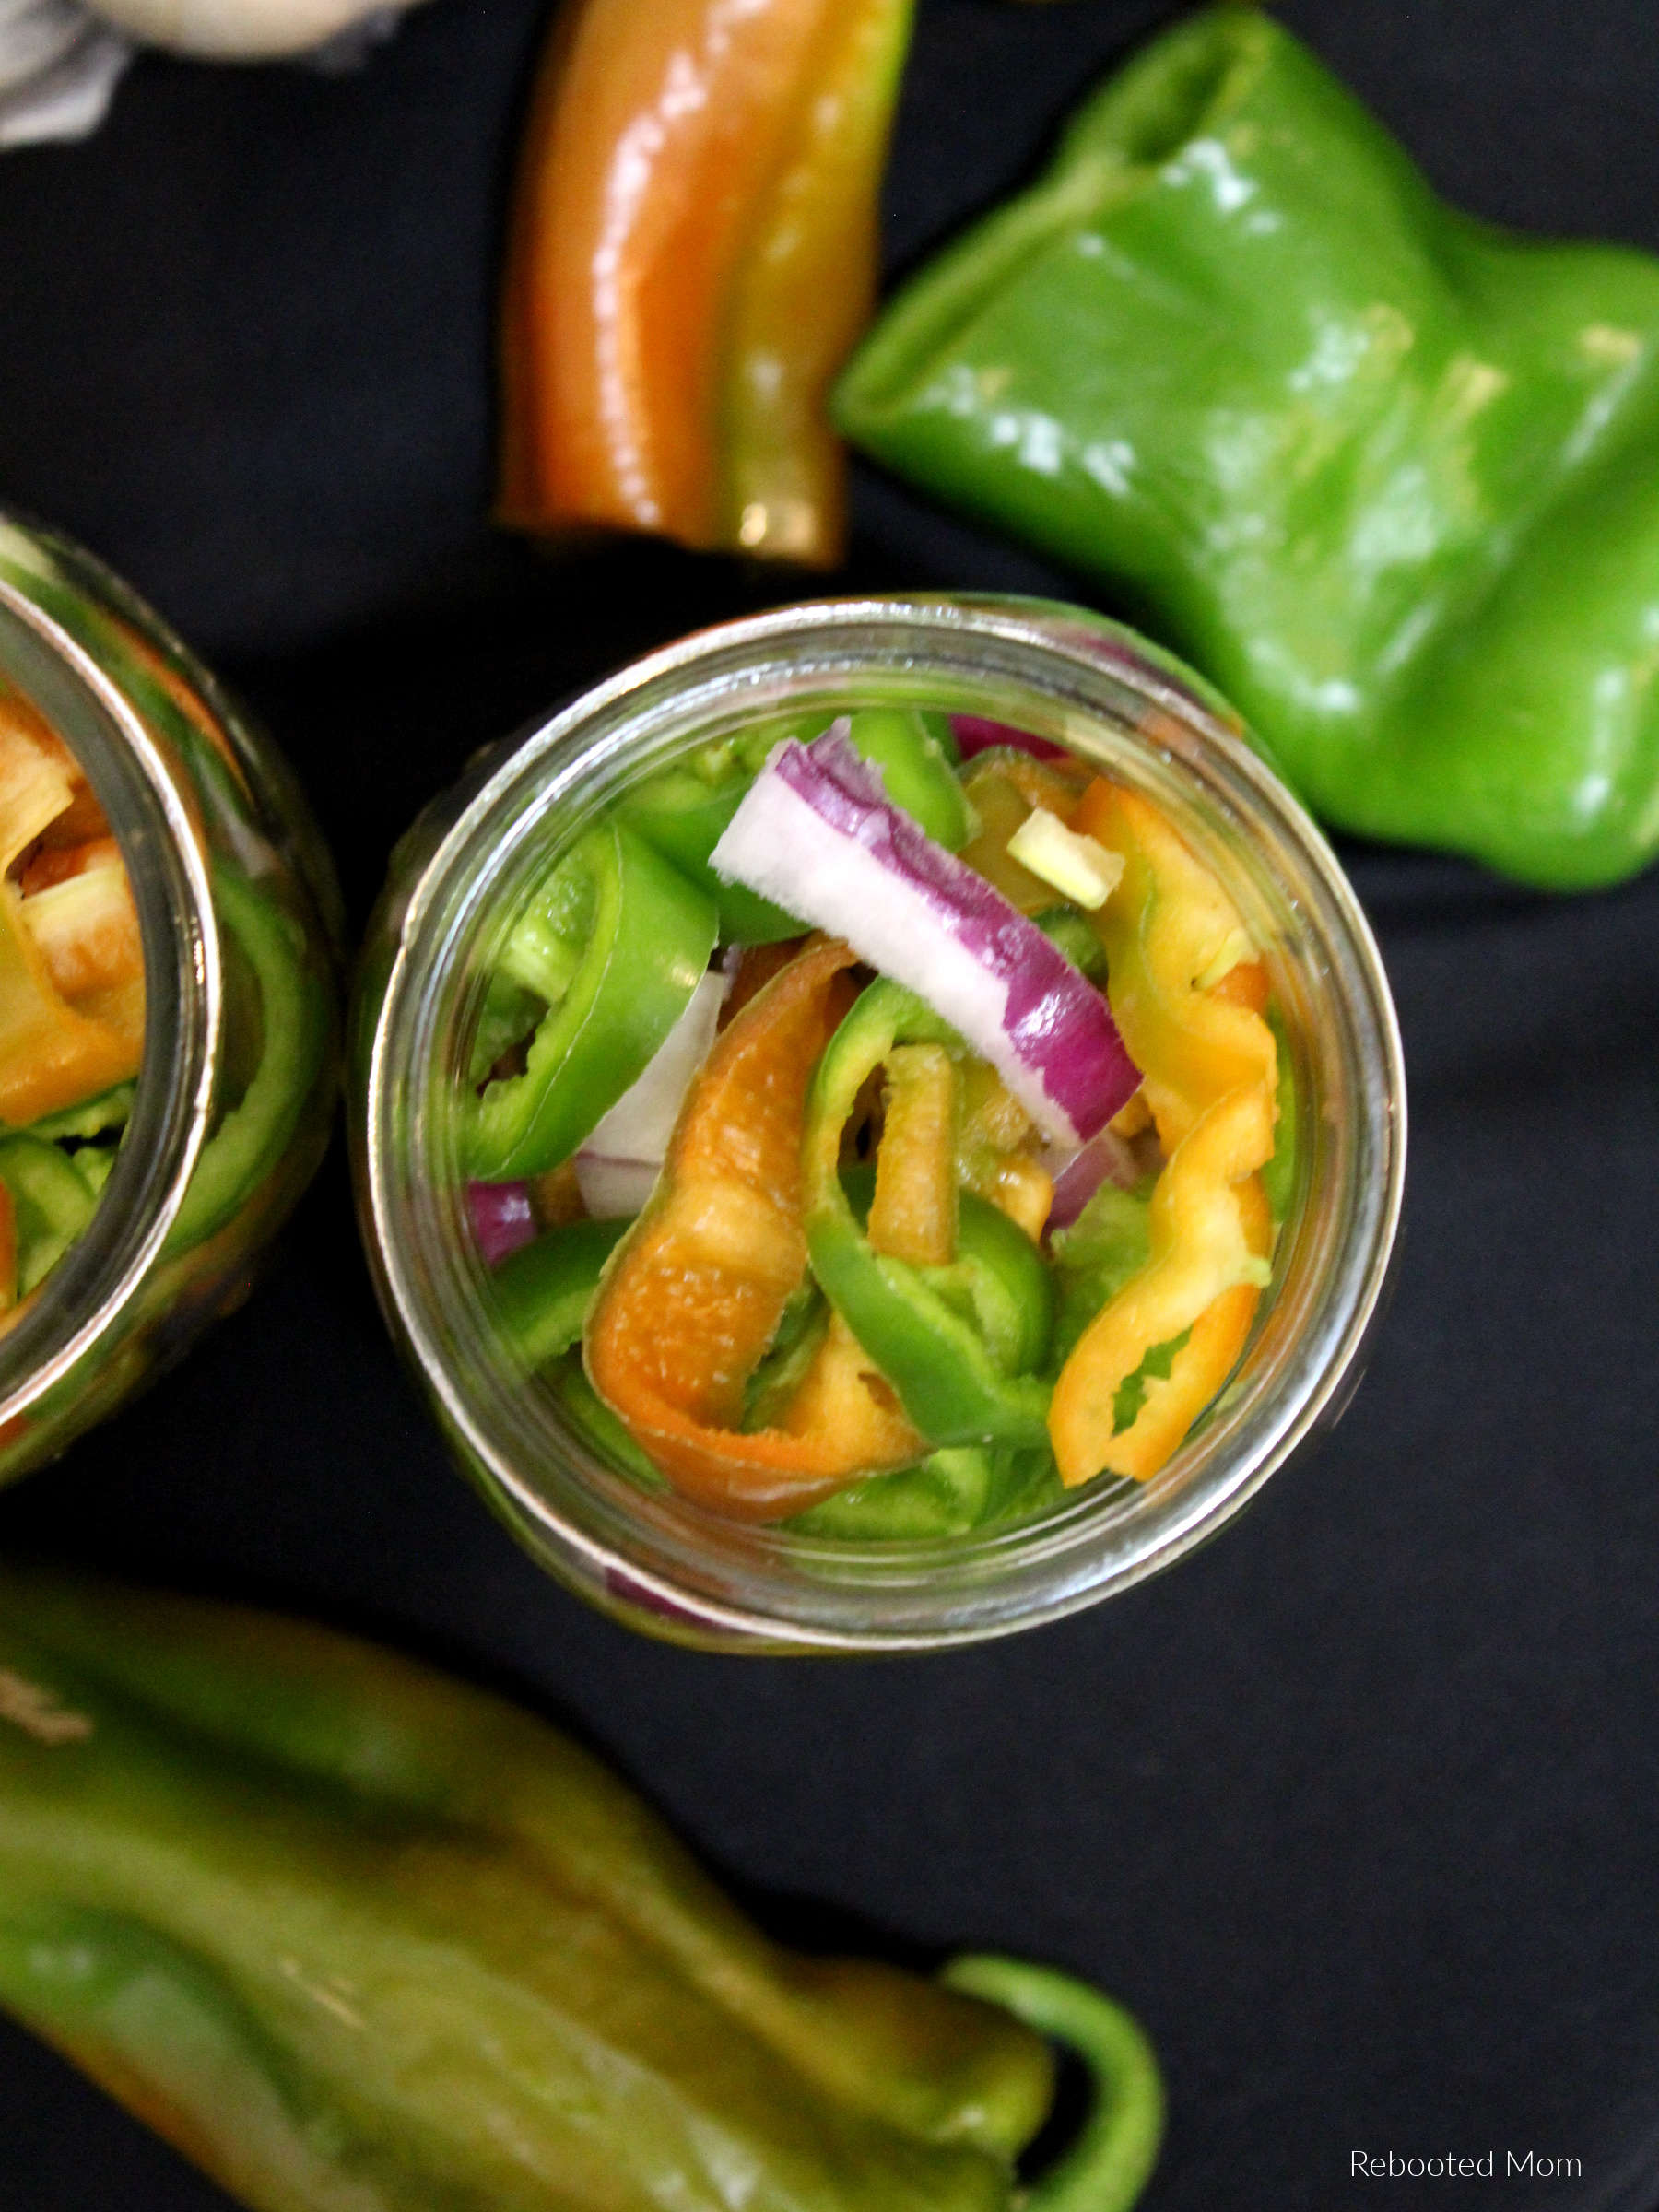 Whip up these sweet yet spicy Pickled Hatch Chiles - in ten minutes or less you can use an abundance of Chile peppers and top on burgers, fries and more!